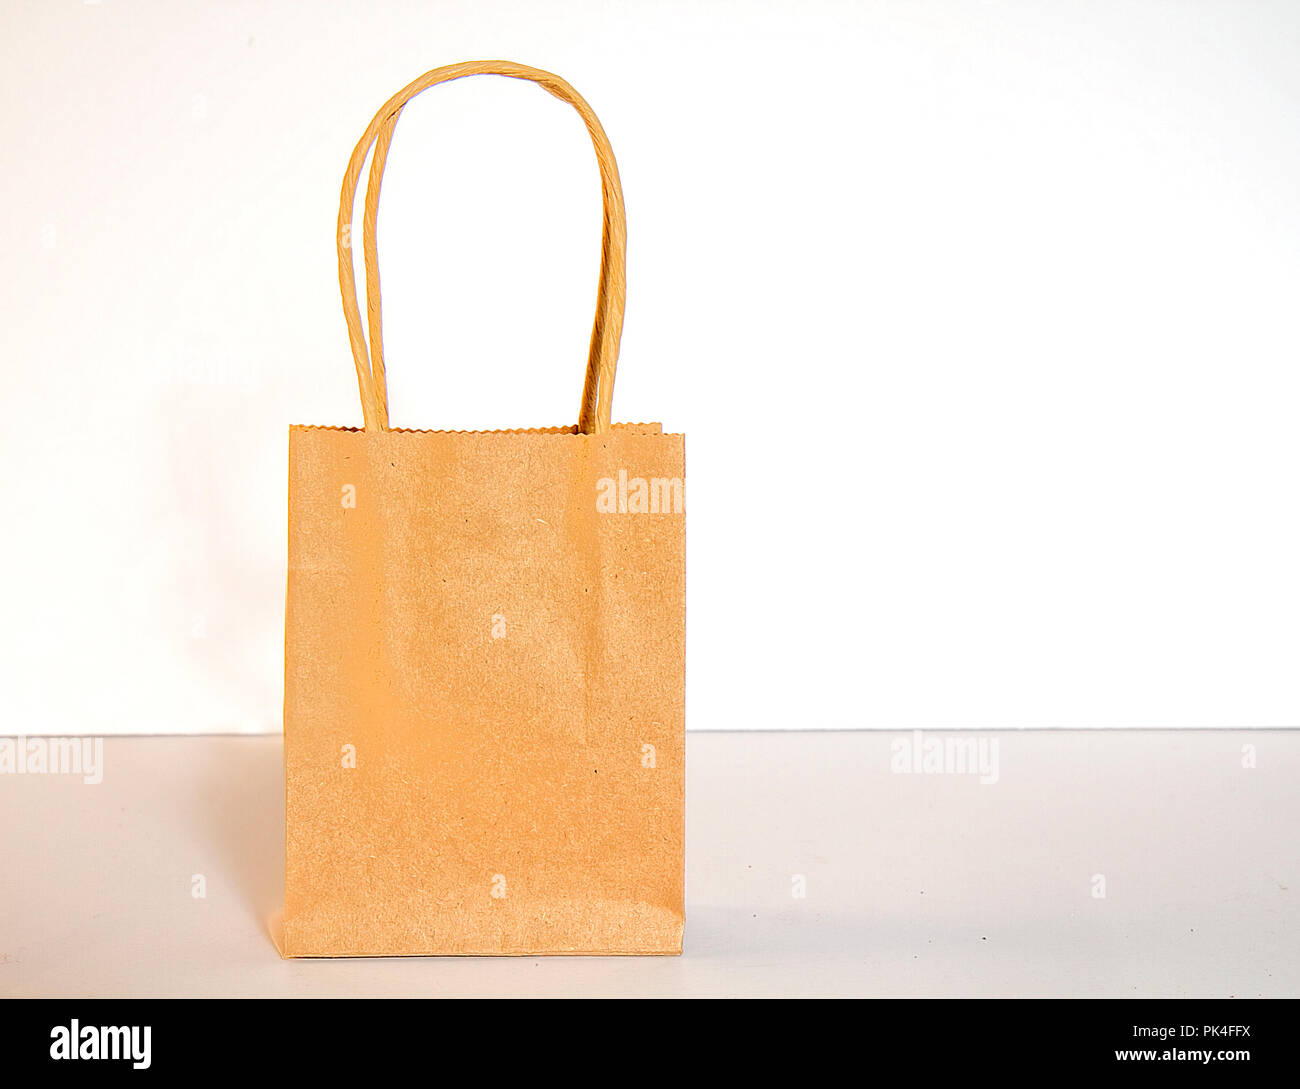 Small brown paper shopping bag with handles isolated on white background. Stock Photo